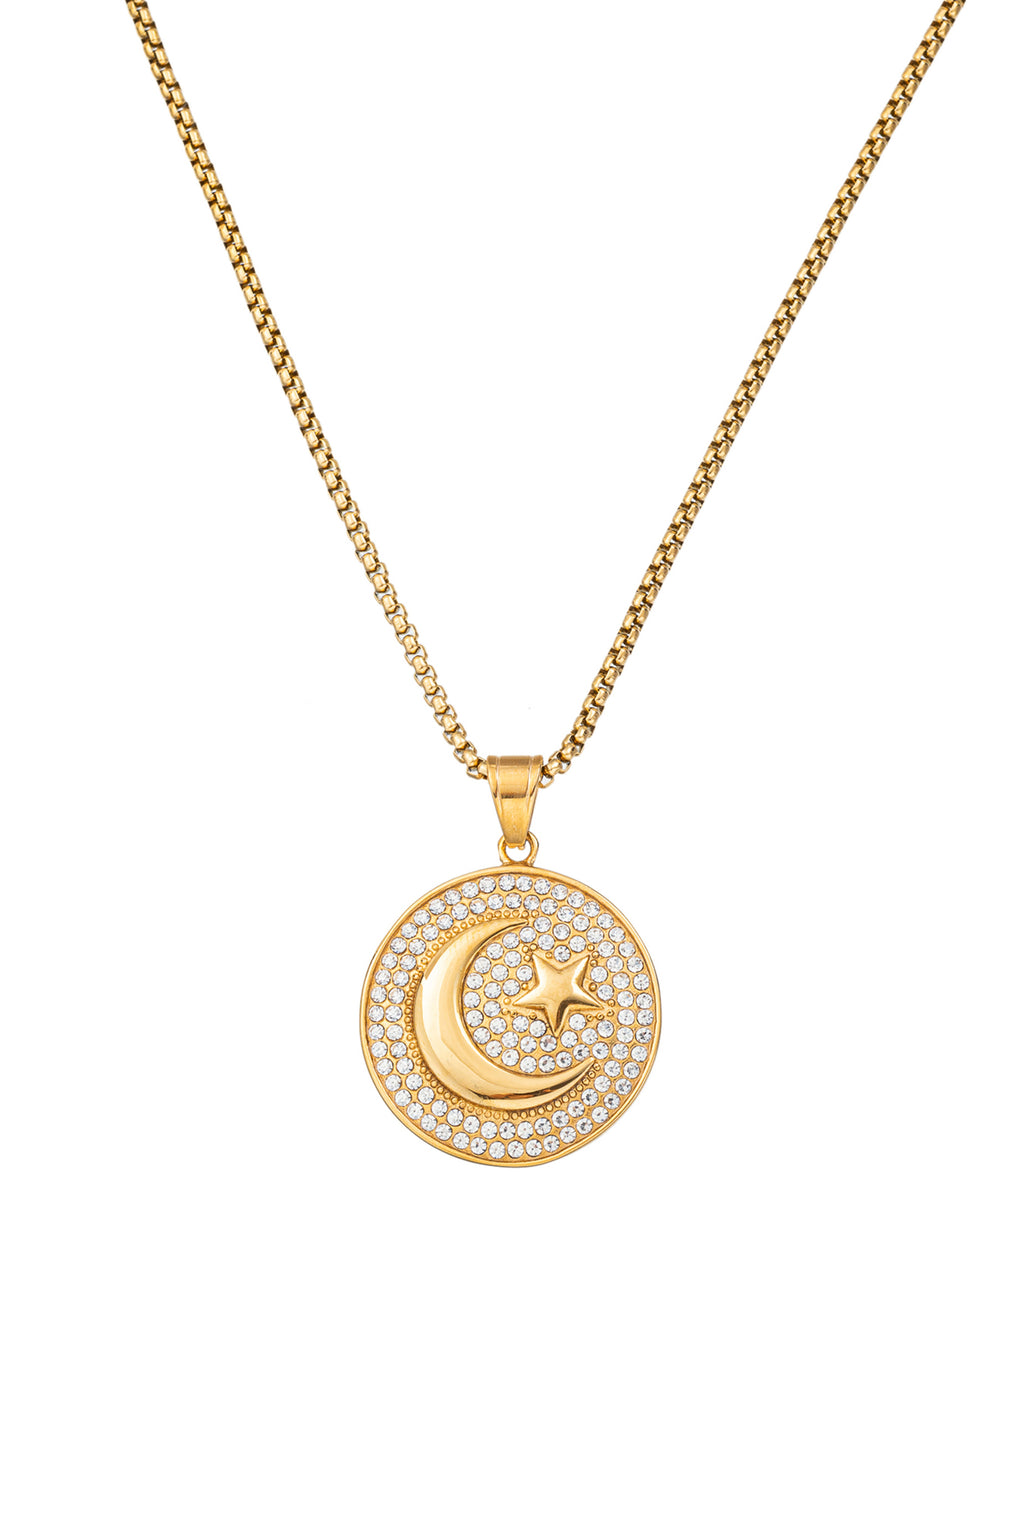 Gold tone titanium star and moon pendant necklace studded with CZ crystals.